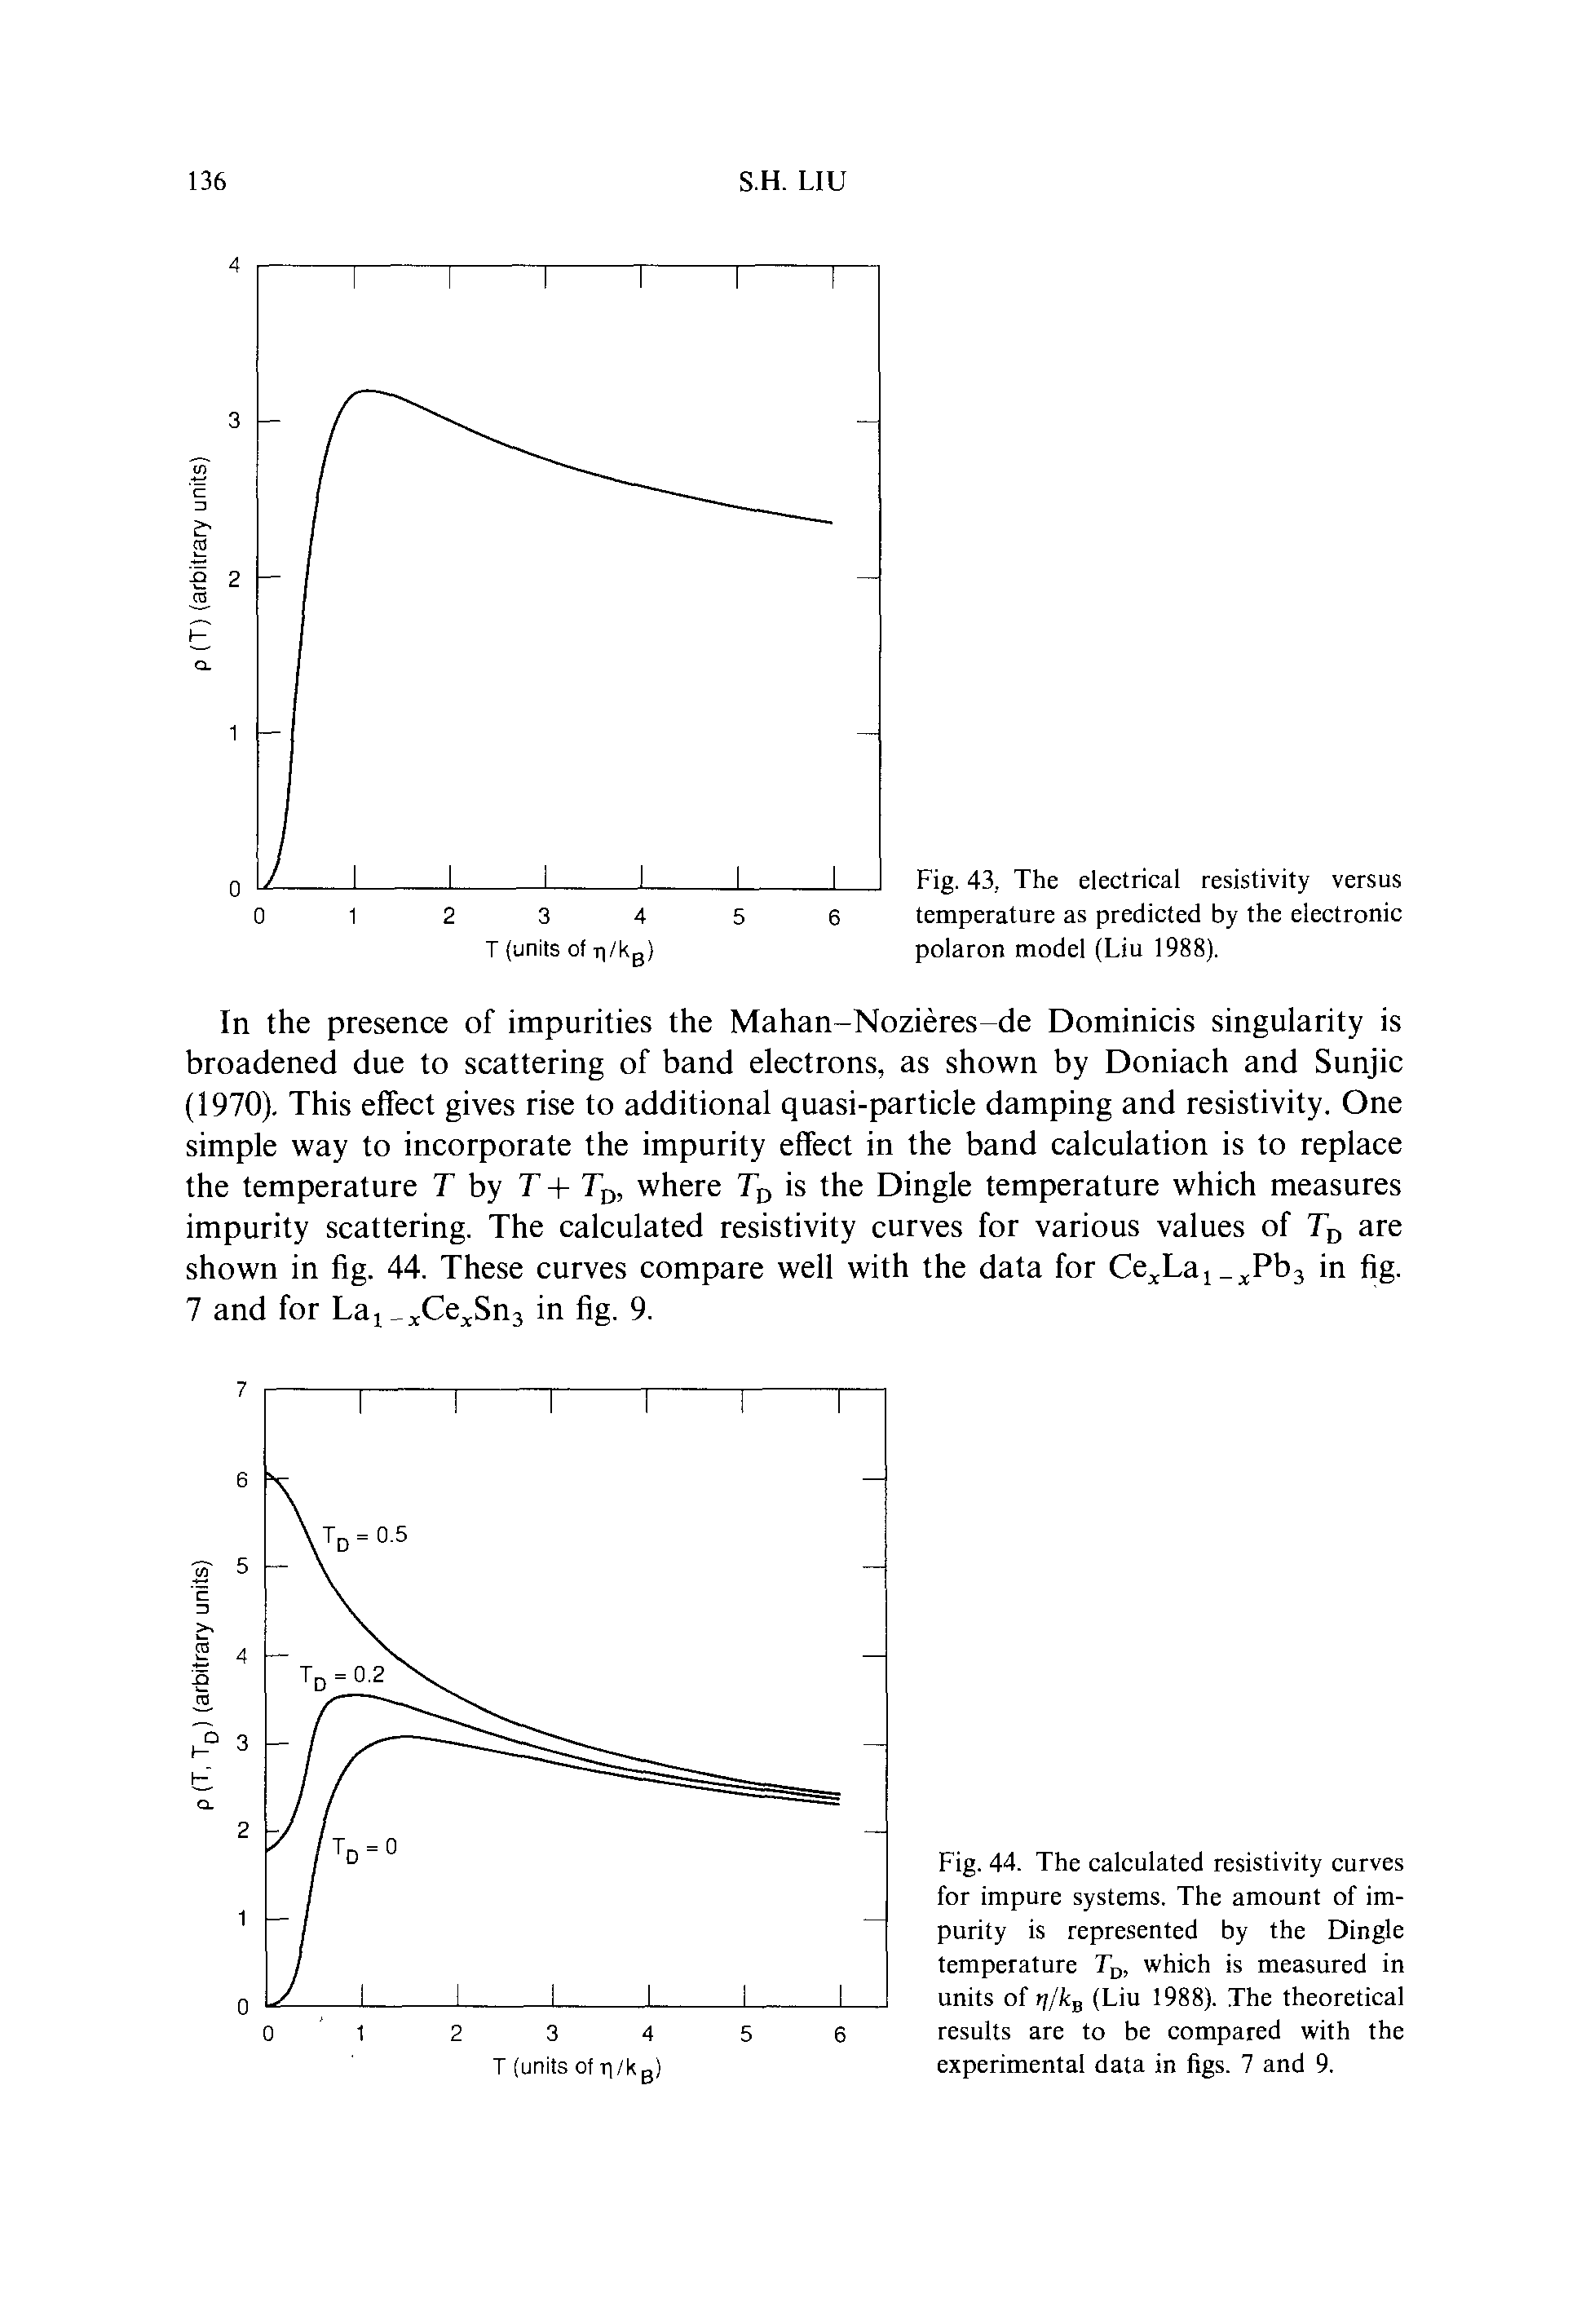 Fig. 43, The electrical resistivity versus temperature as predicted by the electronic polaron model (Liu 1988).